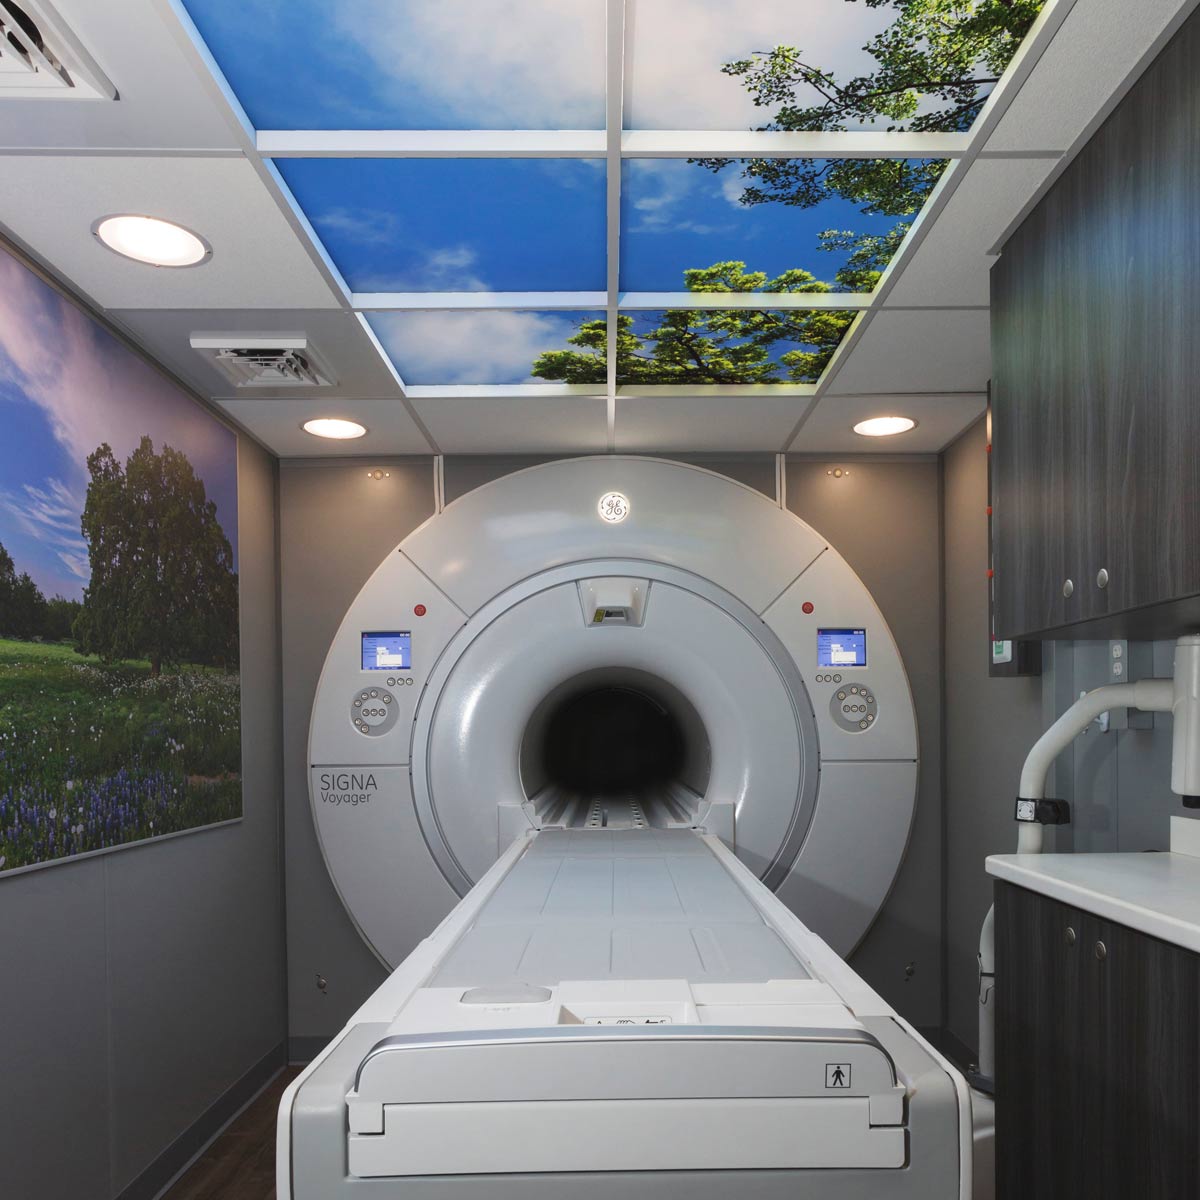 room with a view mri machine